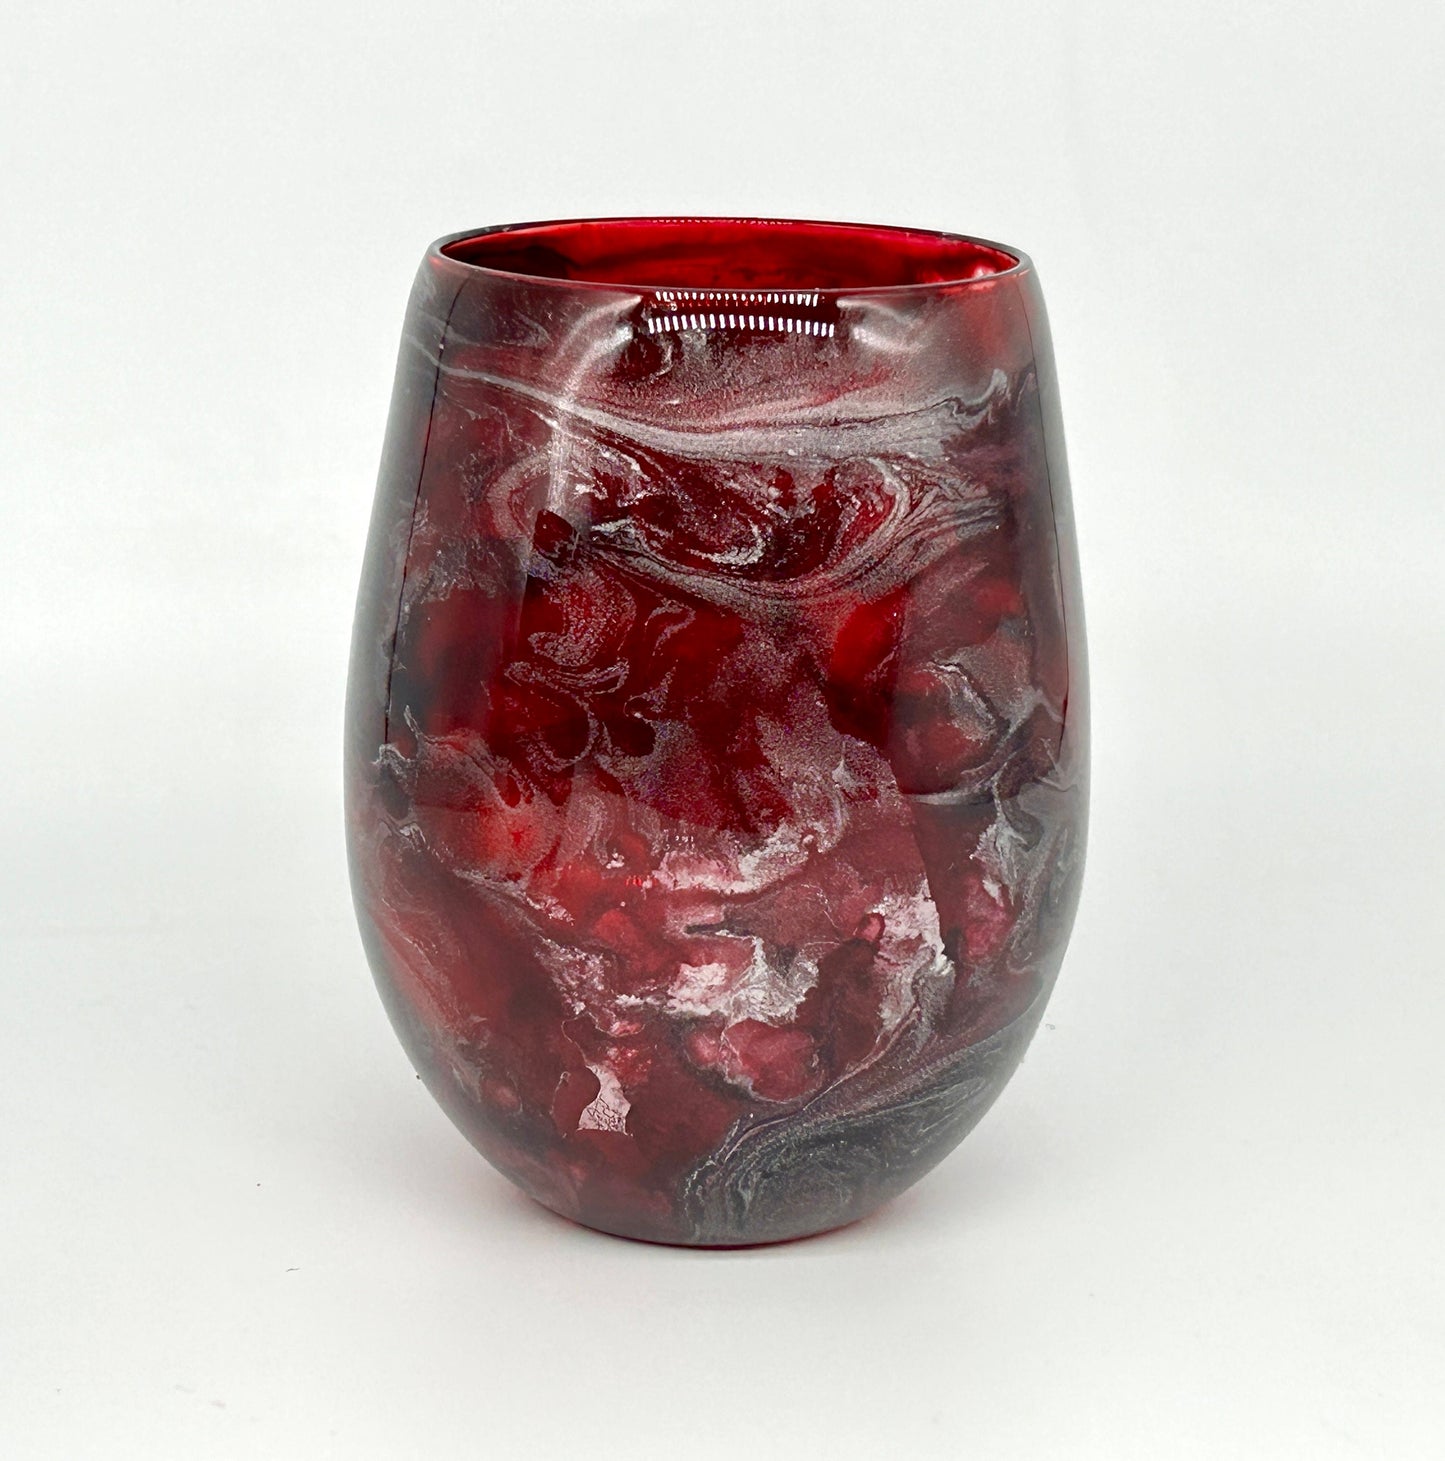 Dark Red and Silver Resin Art Stemless Wine Glass Set of Two Customize